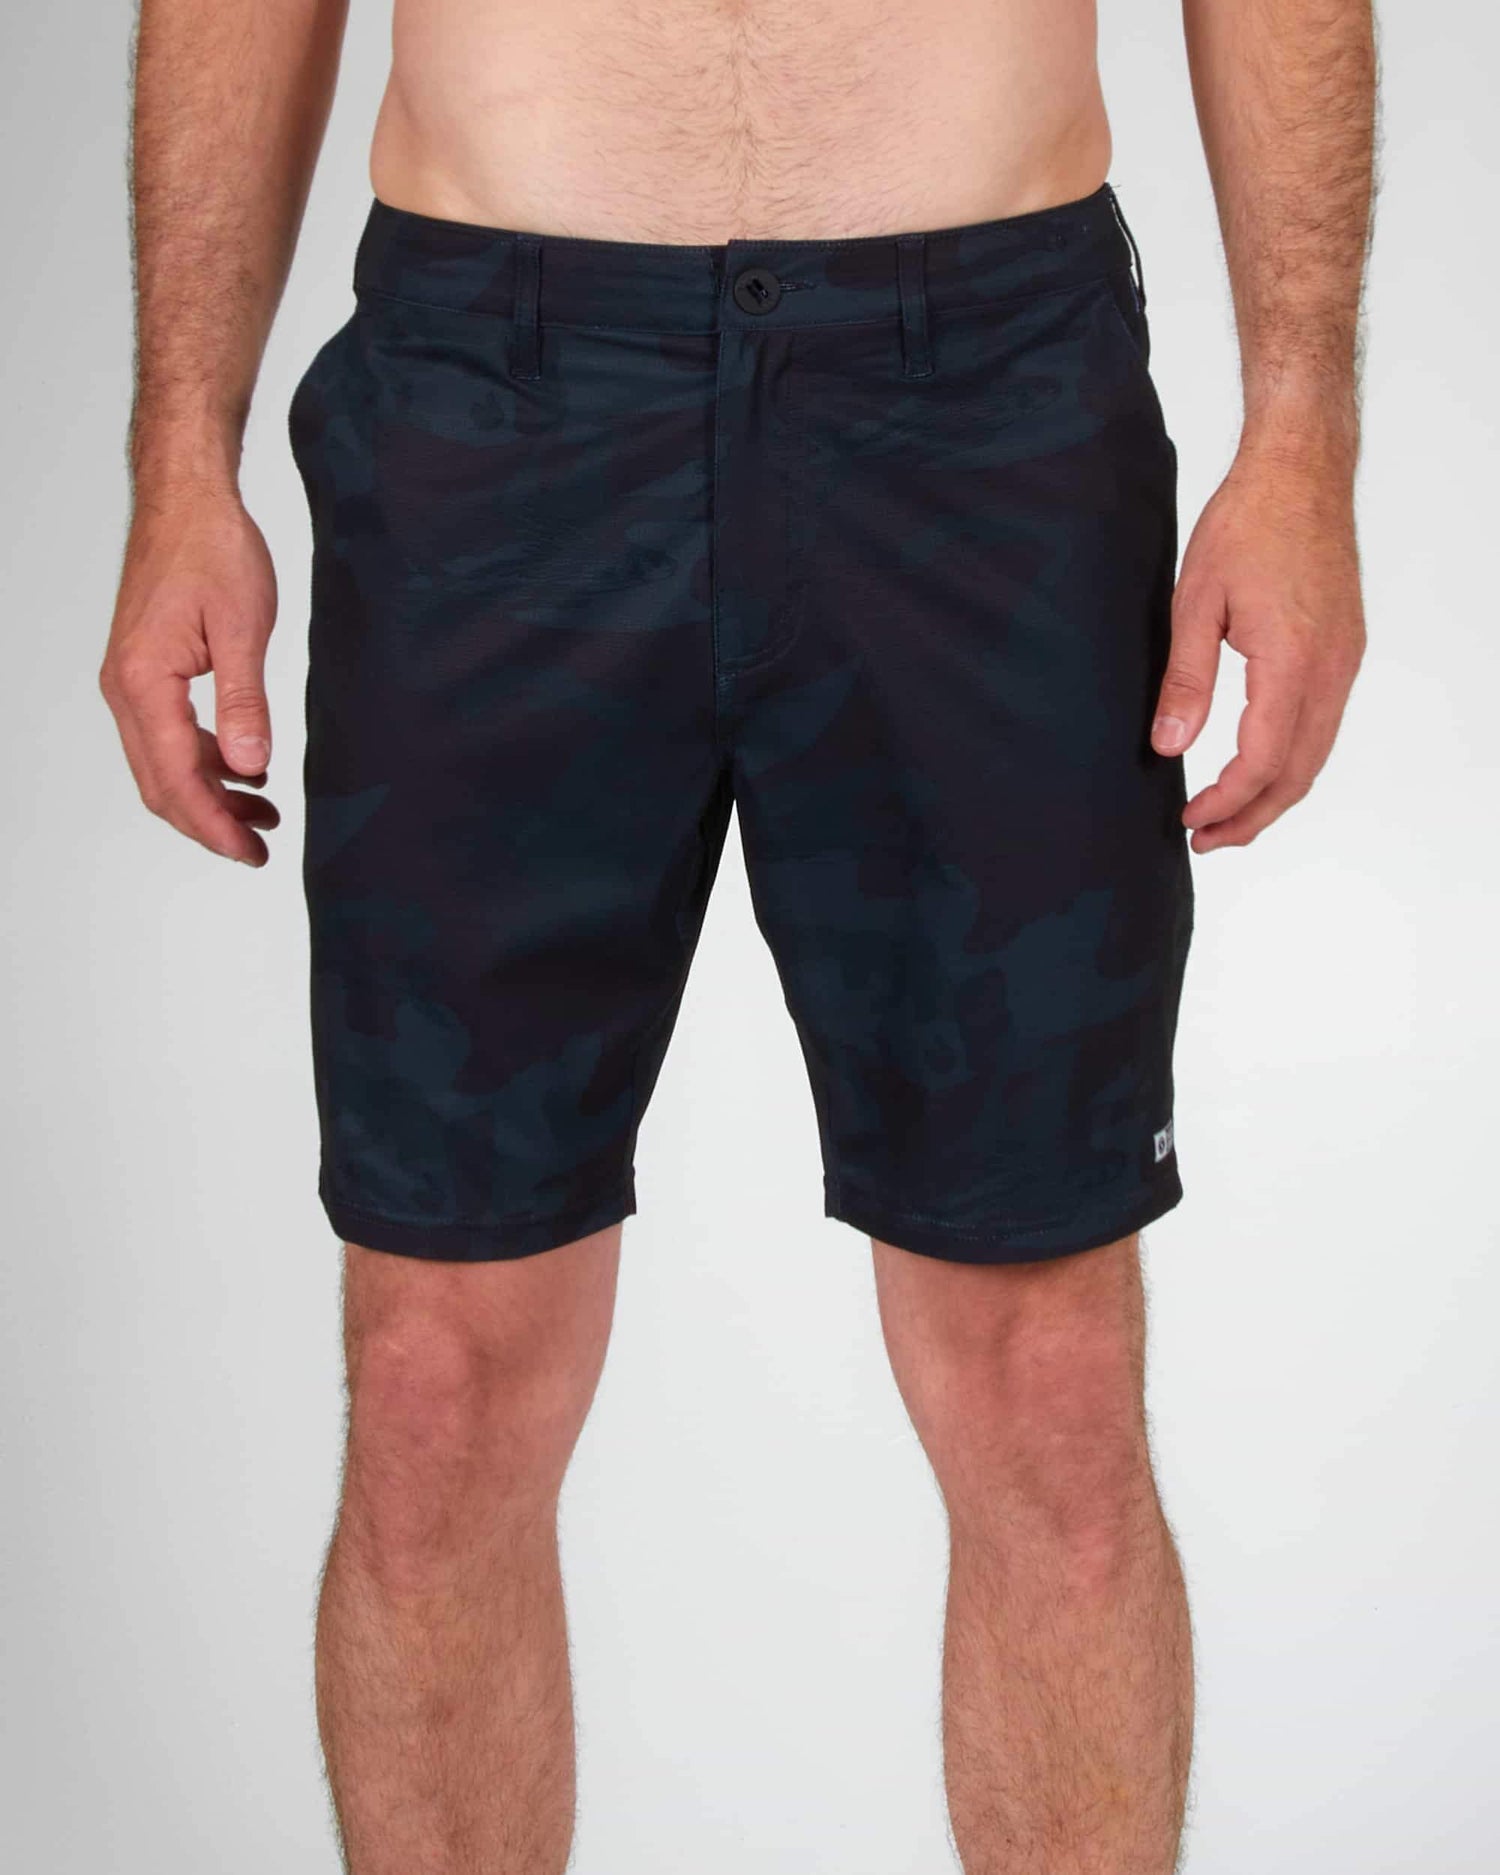 Salty crew SHORTS DRIFTER 2 PERFORATED - BLACK CAMO in BLACK CAMO